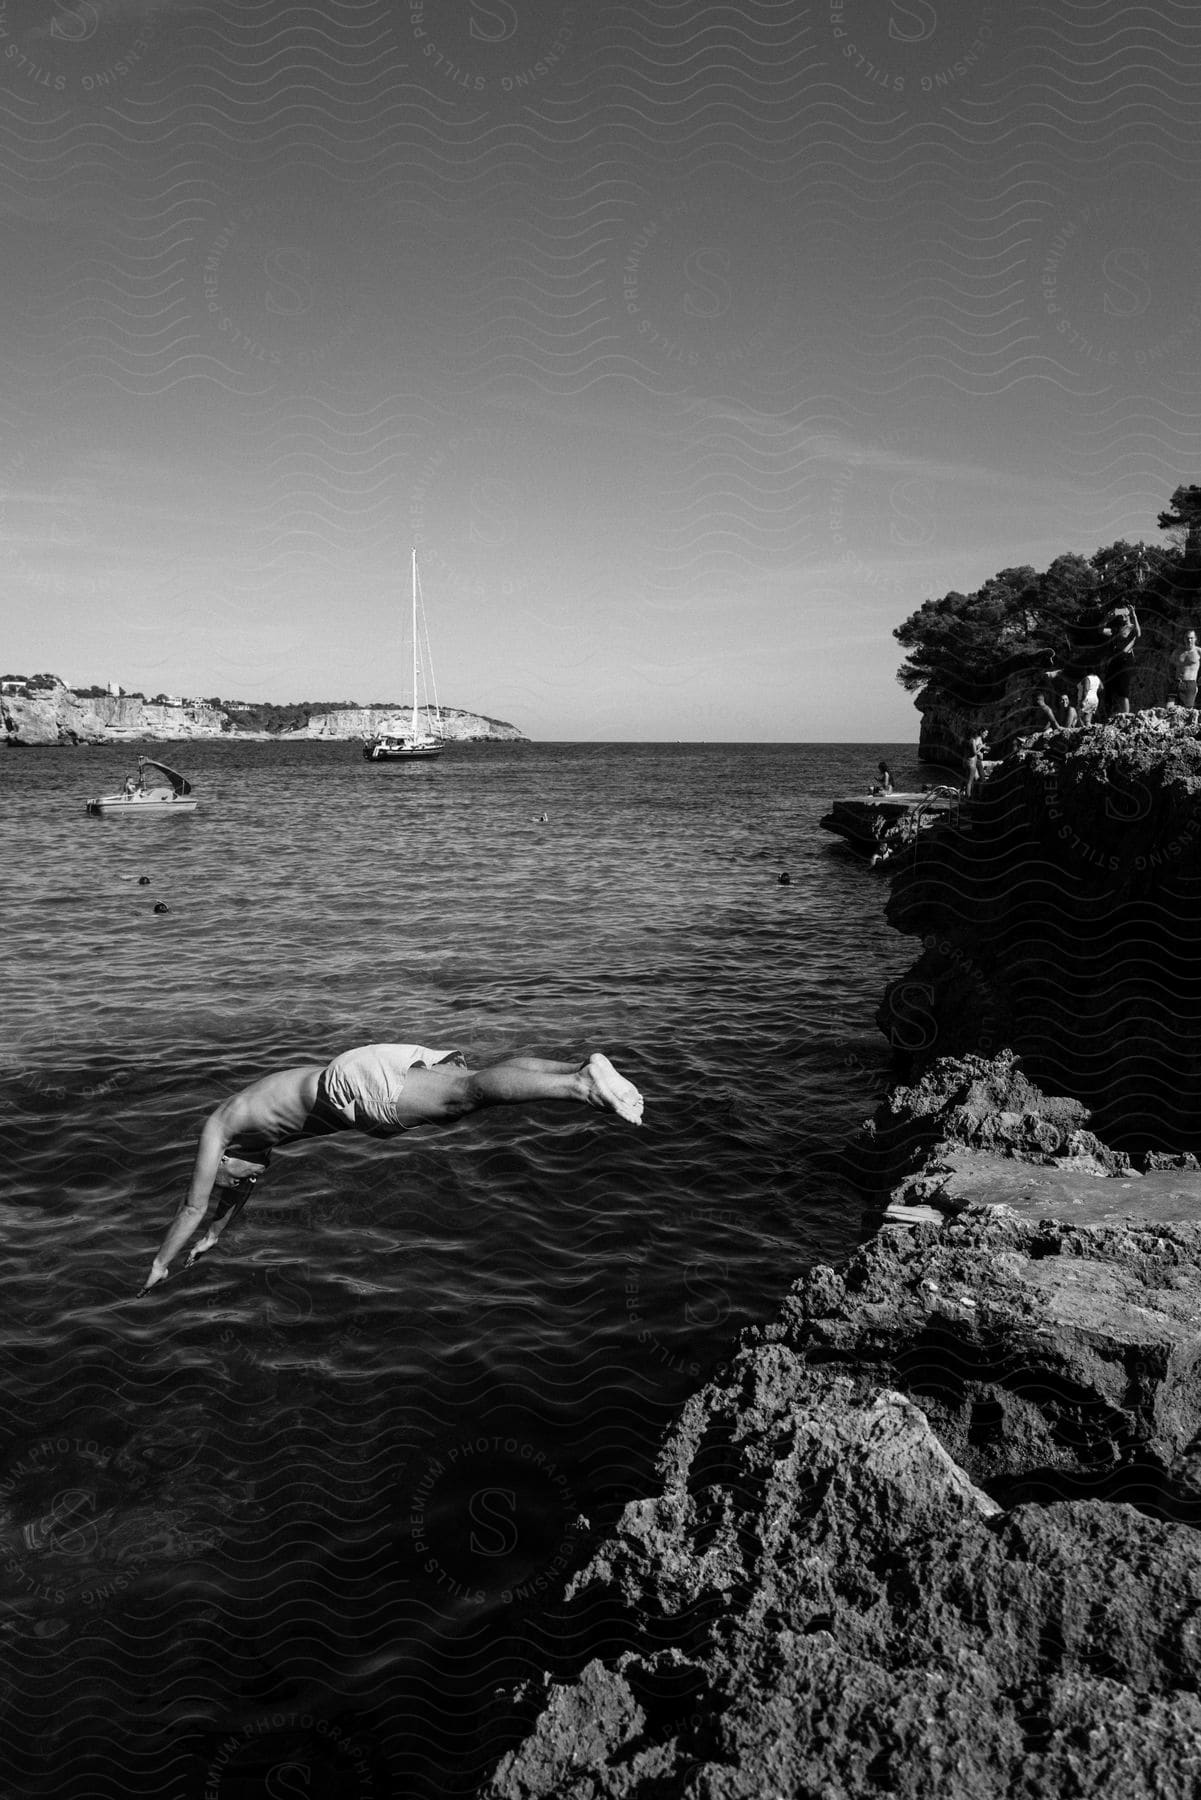 Man diving off rocky edge into mediterranean sea with sailboats in the background